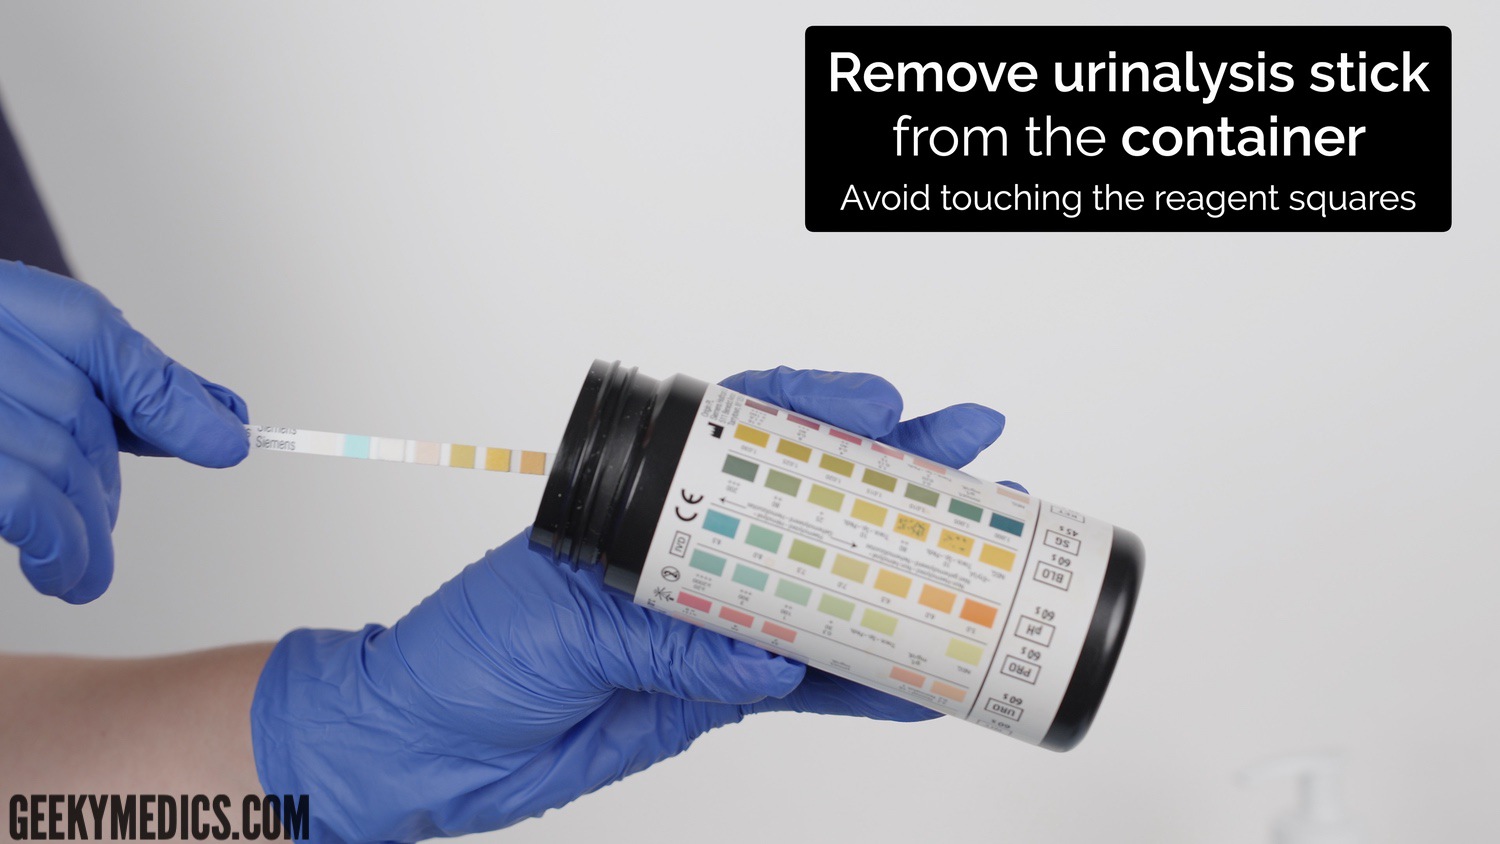 Urinalysis - Remove the testing strip from the container